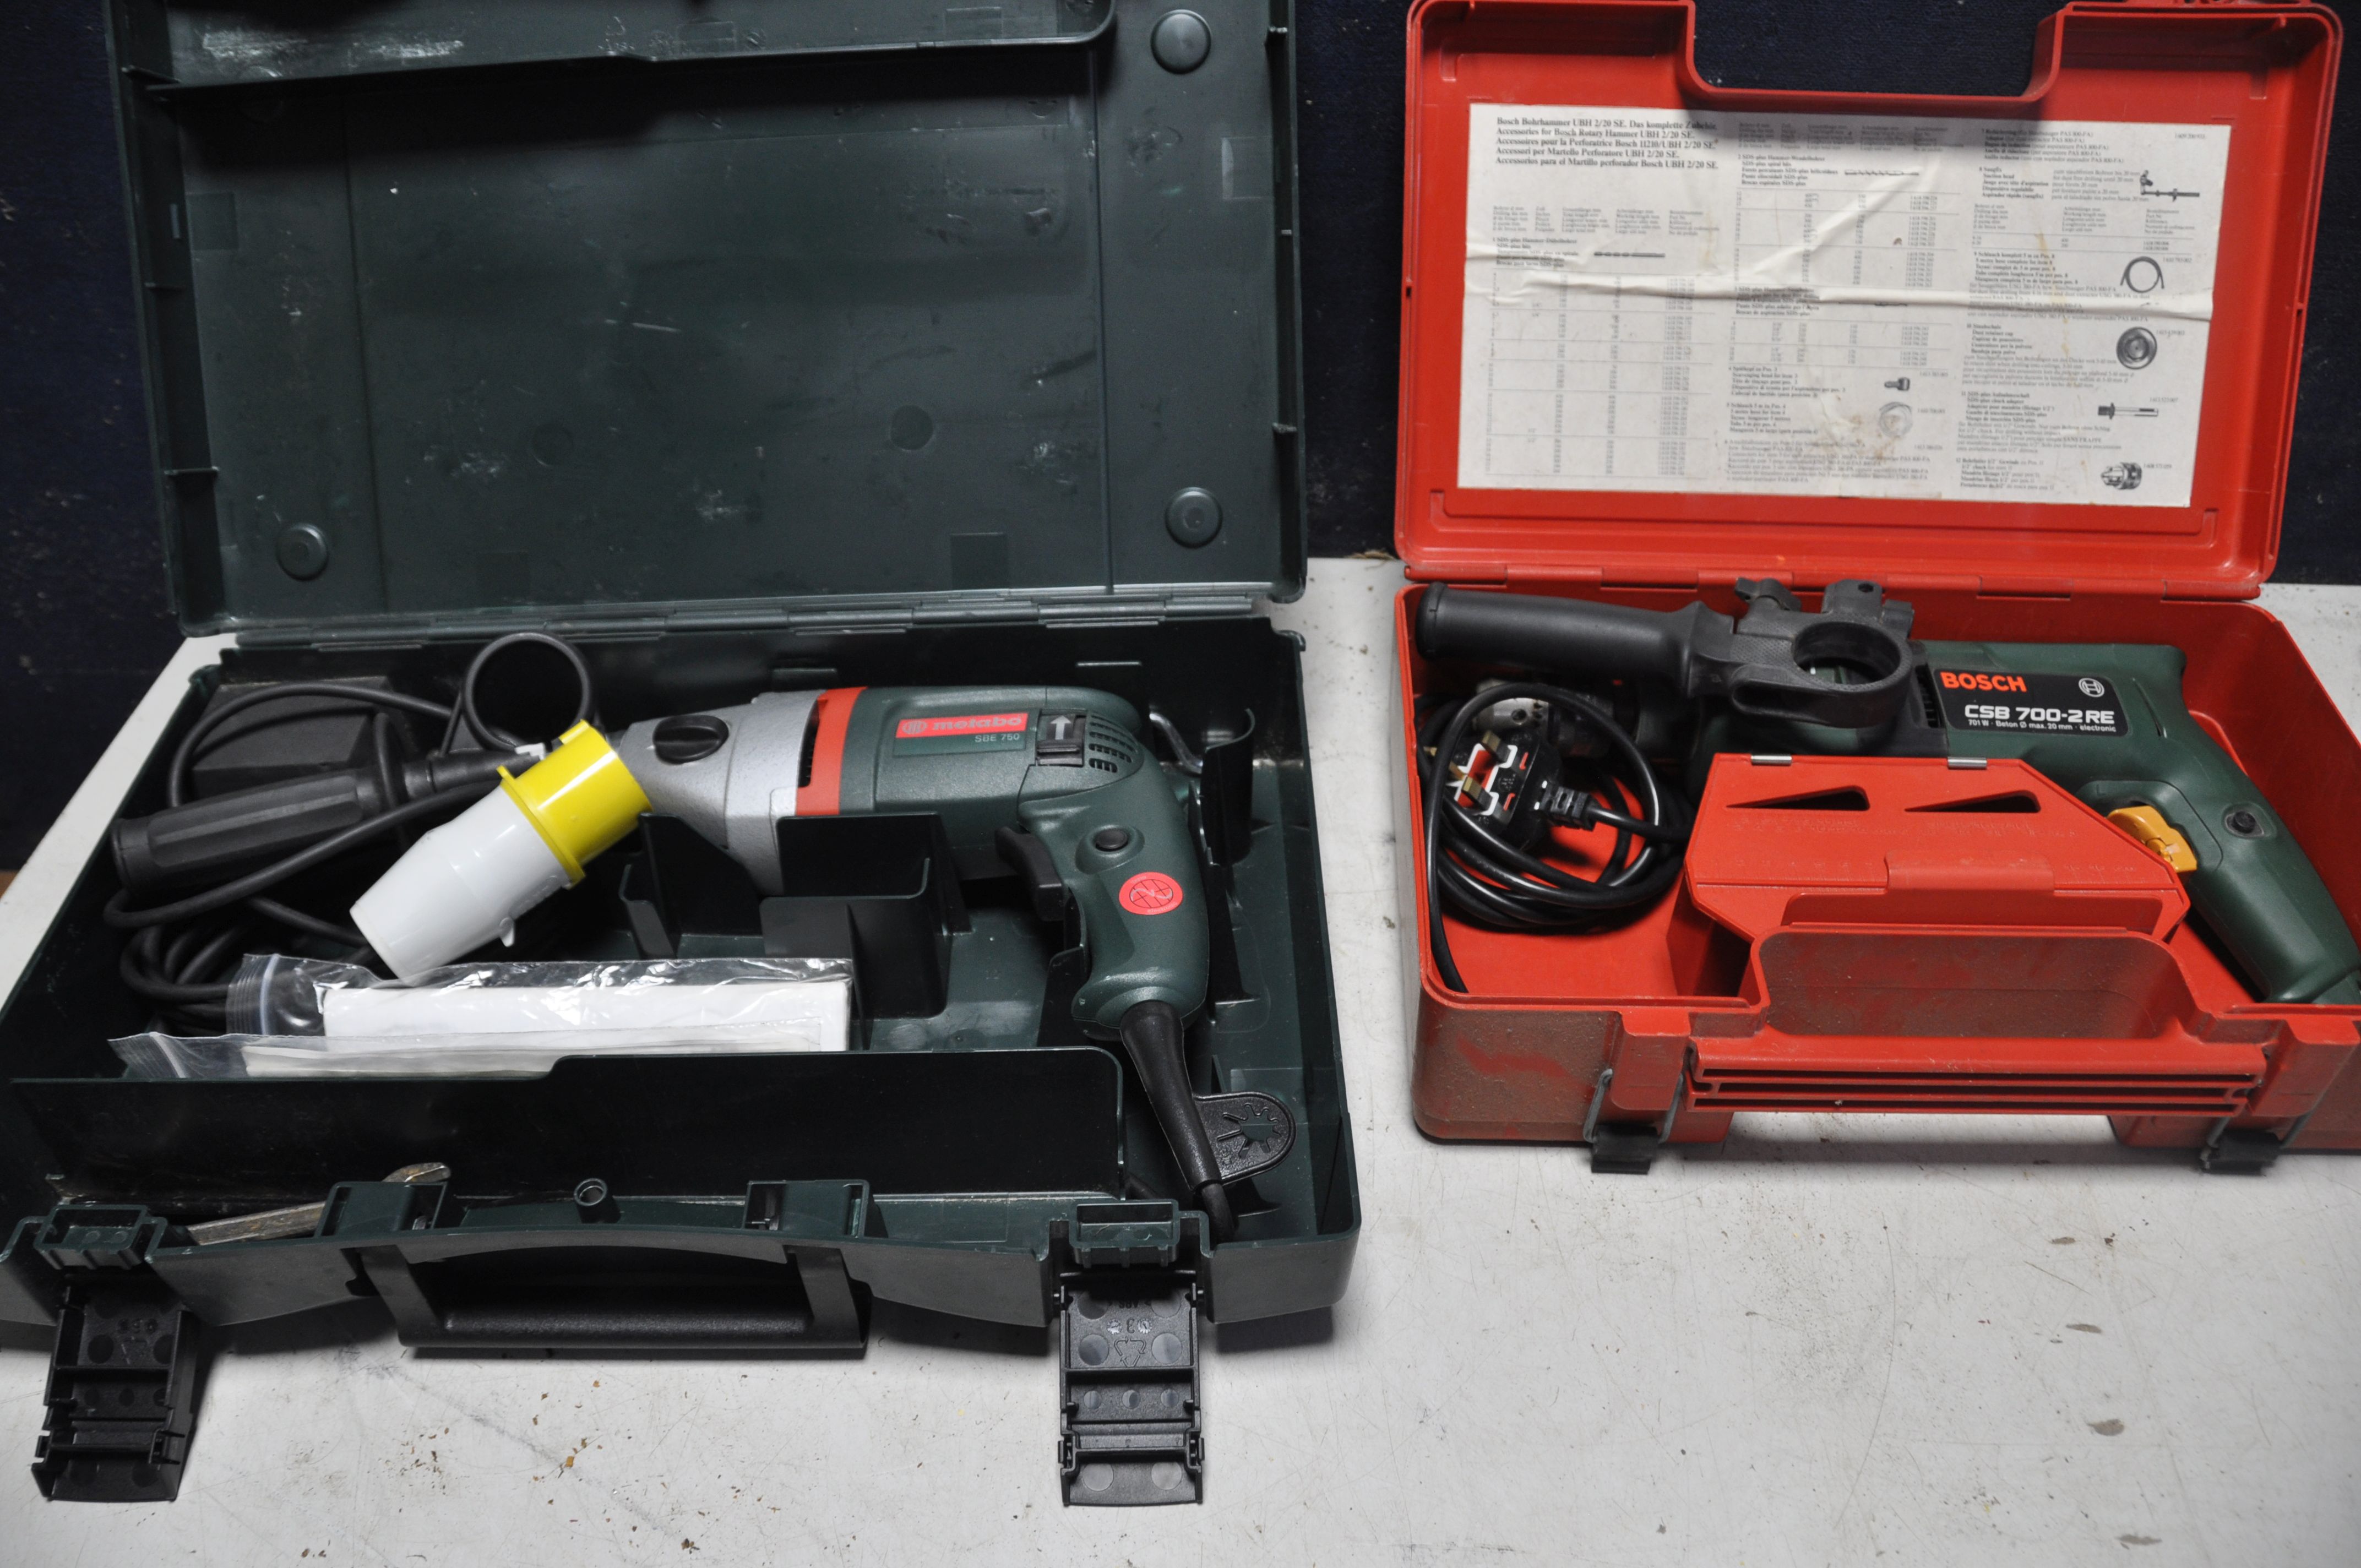 A METABO SBE750 DRILL in original case with 110v plug along with a Bosch CSB 700-2RE drill in - Image 2 of 3